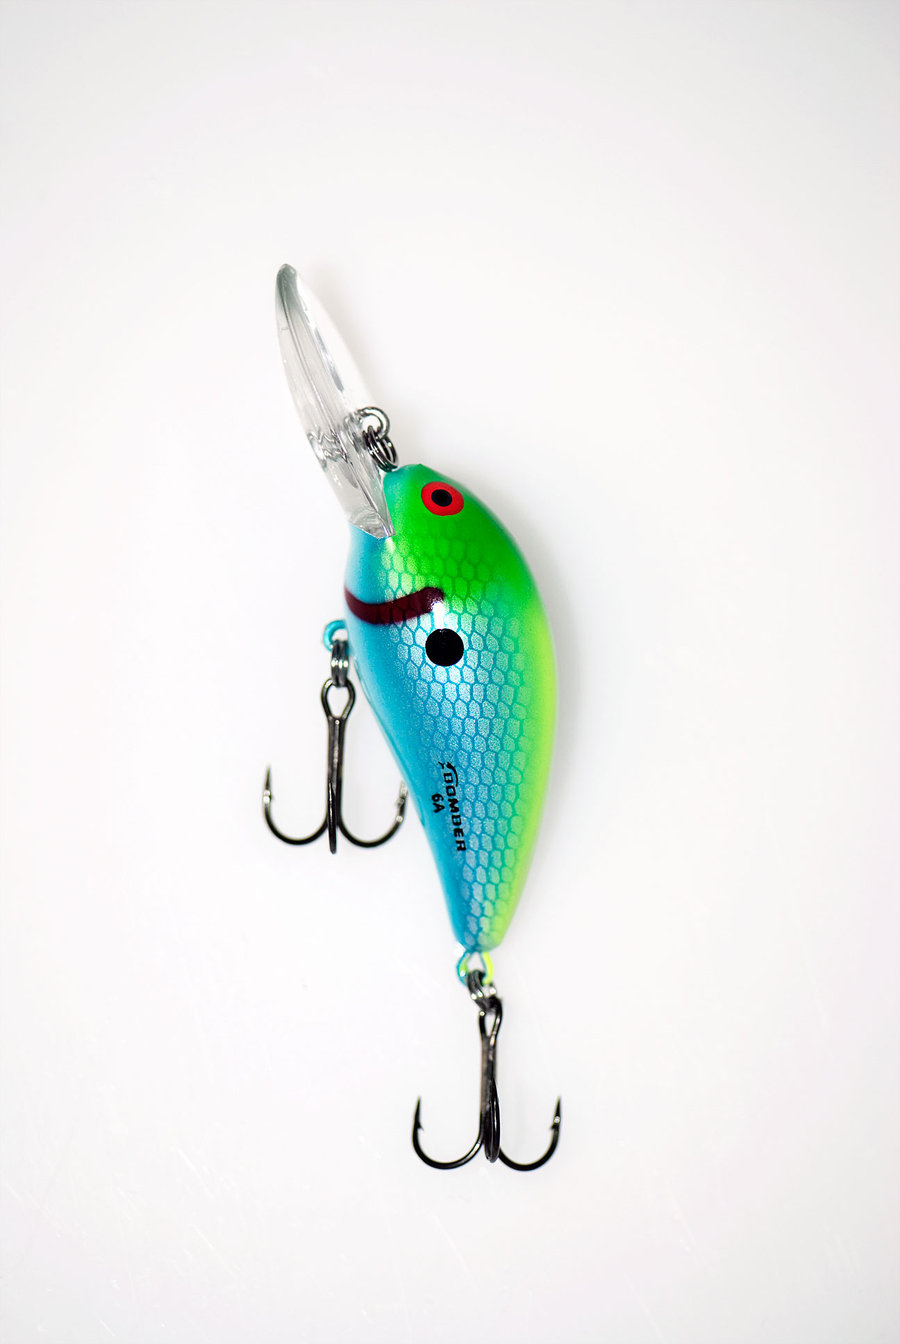 Free Download Fishing Lure Wallpaper 900x1344 For Your Desktop Mobile Tablet Explore 46 Fishing Lure Wallpaper Bass Wallpaper Border Wallpaper Borders Fishing Salmon Fishing Wallpaper